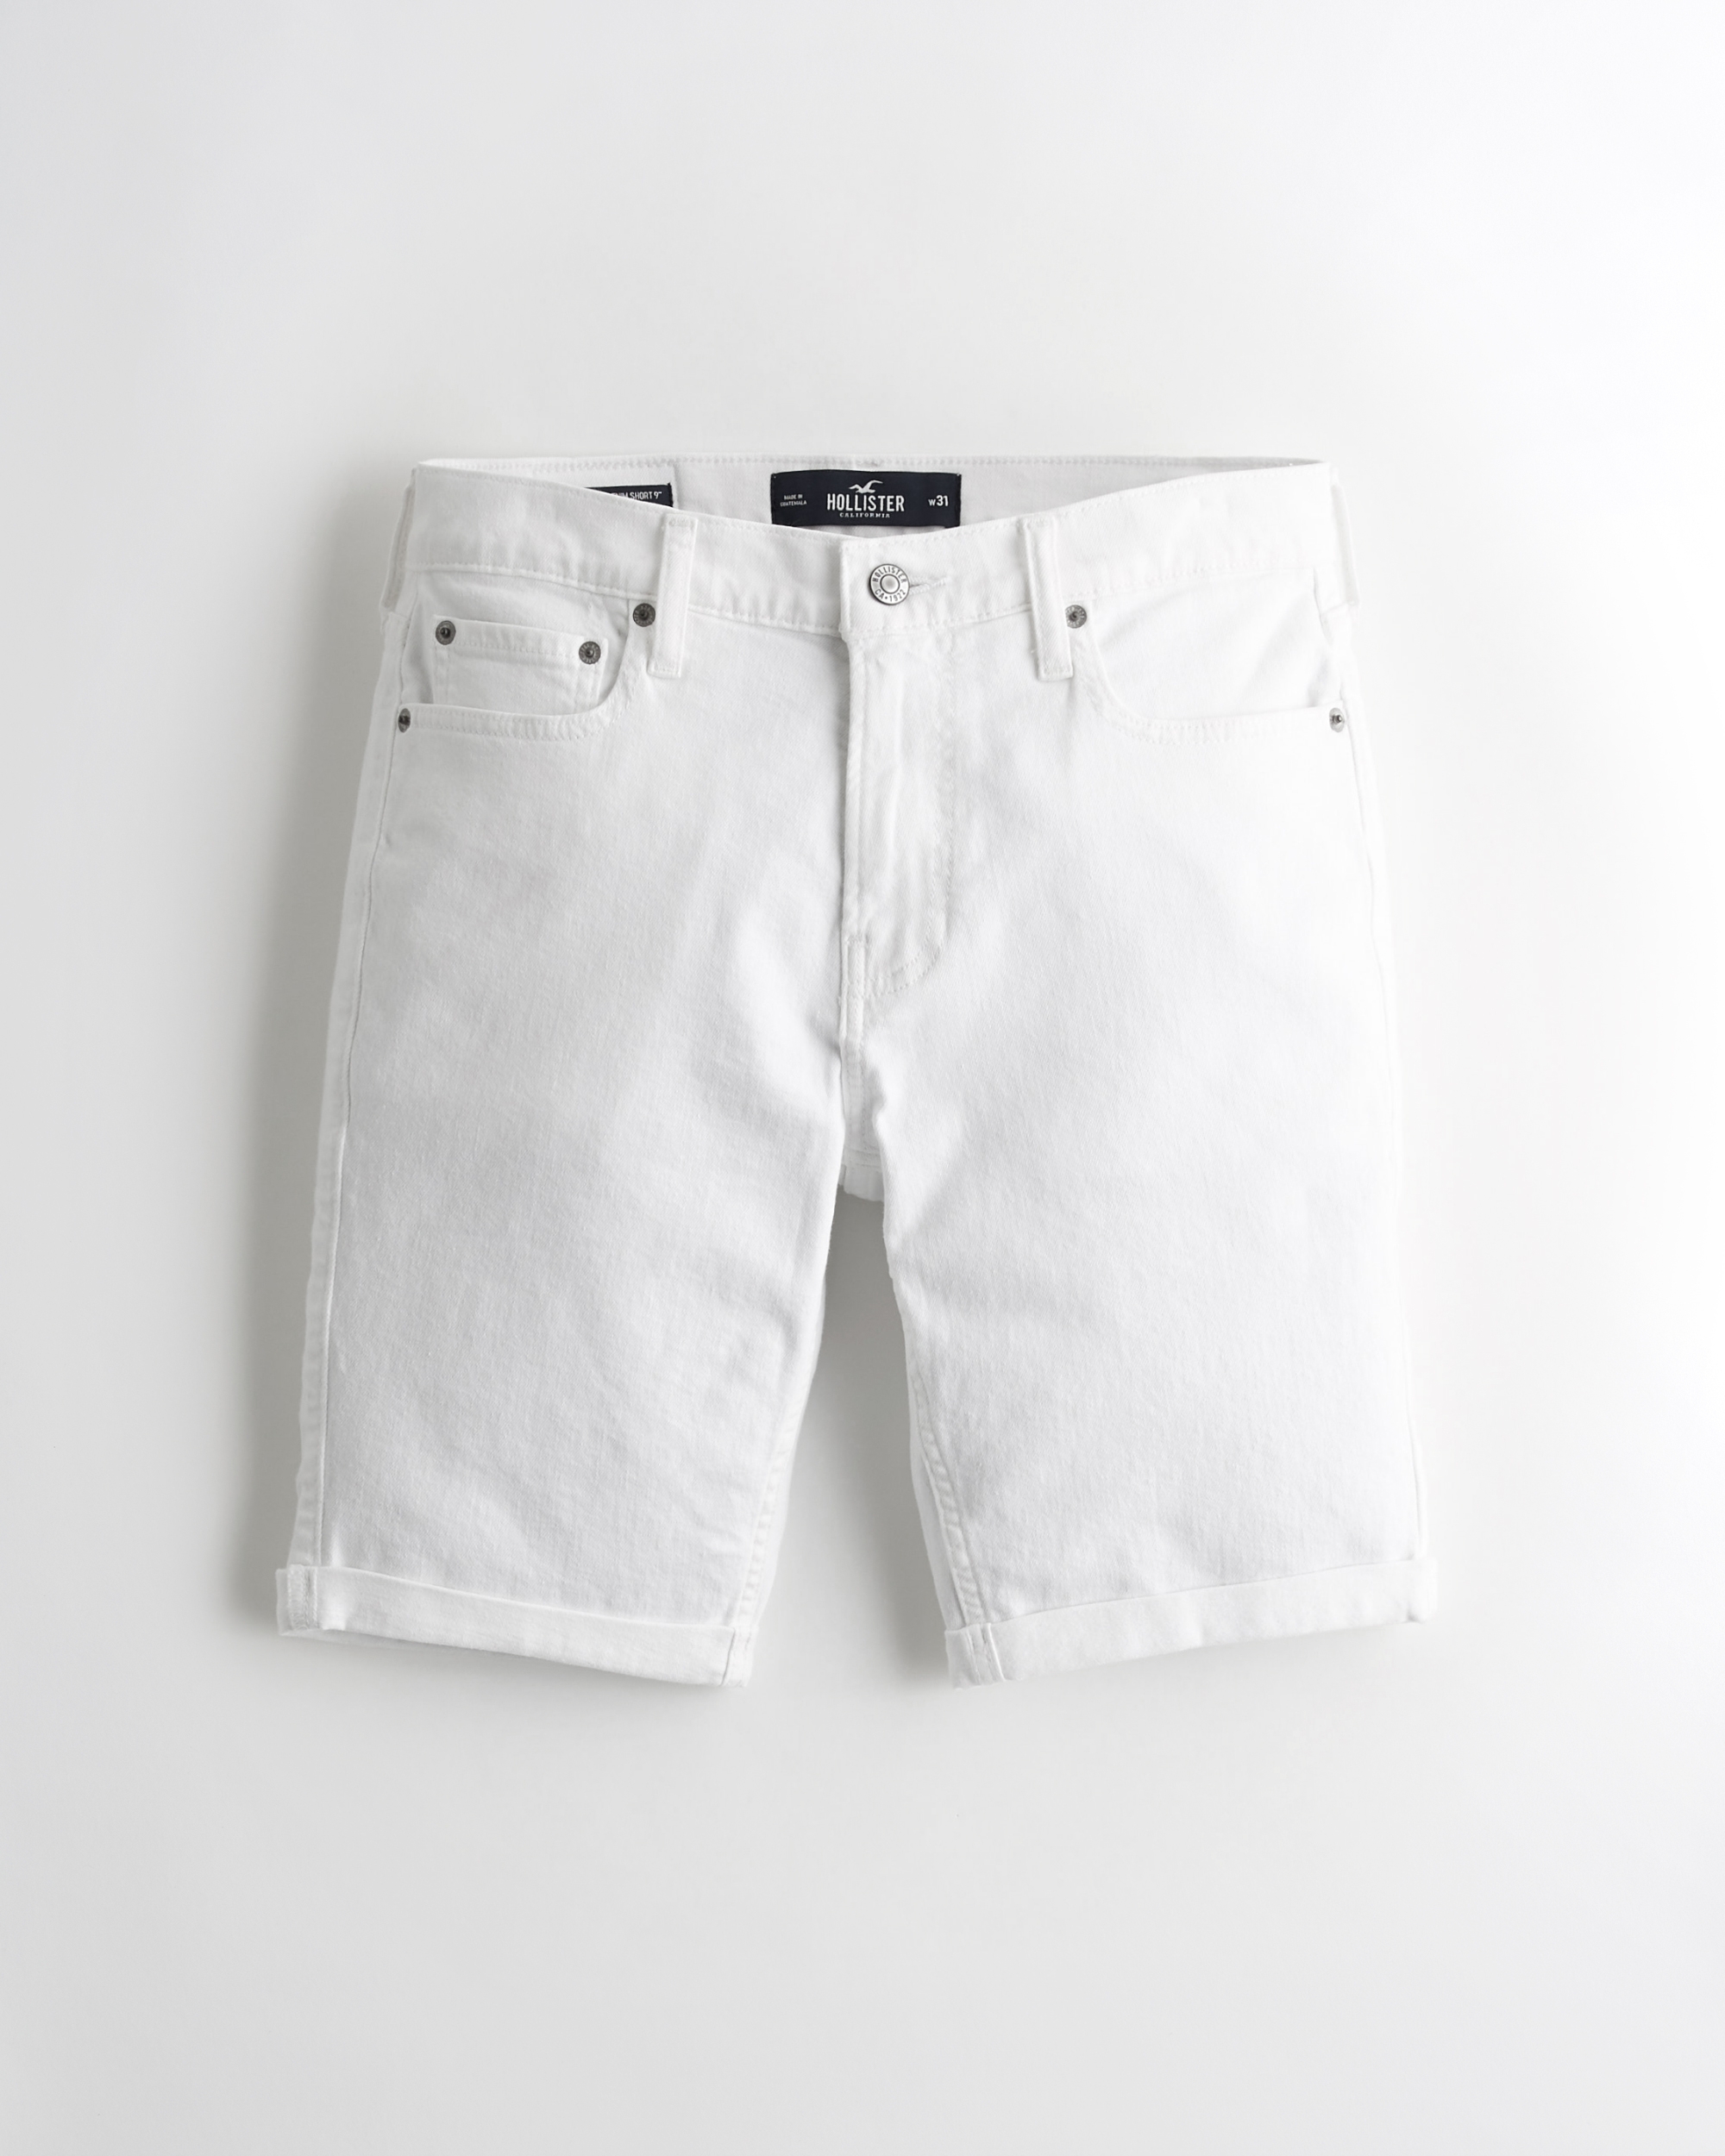 hollister ripped jean shorts